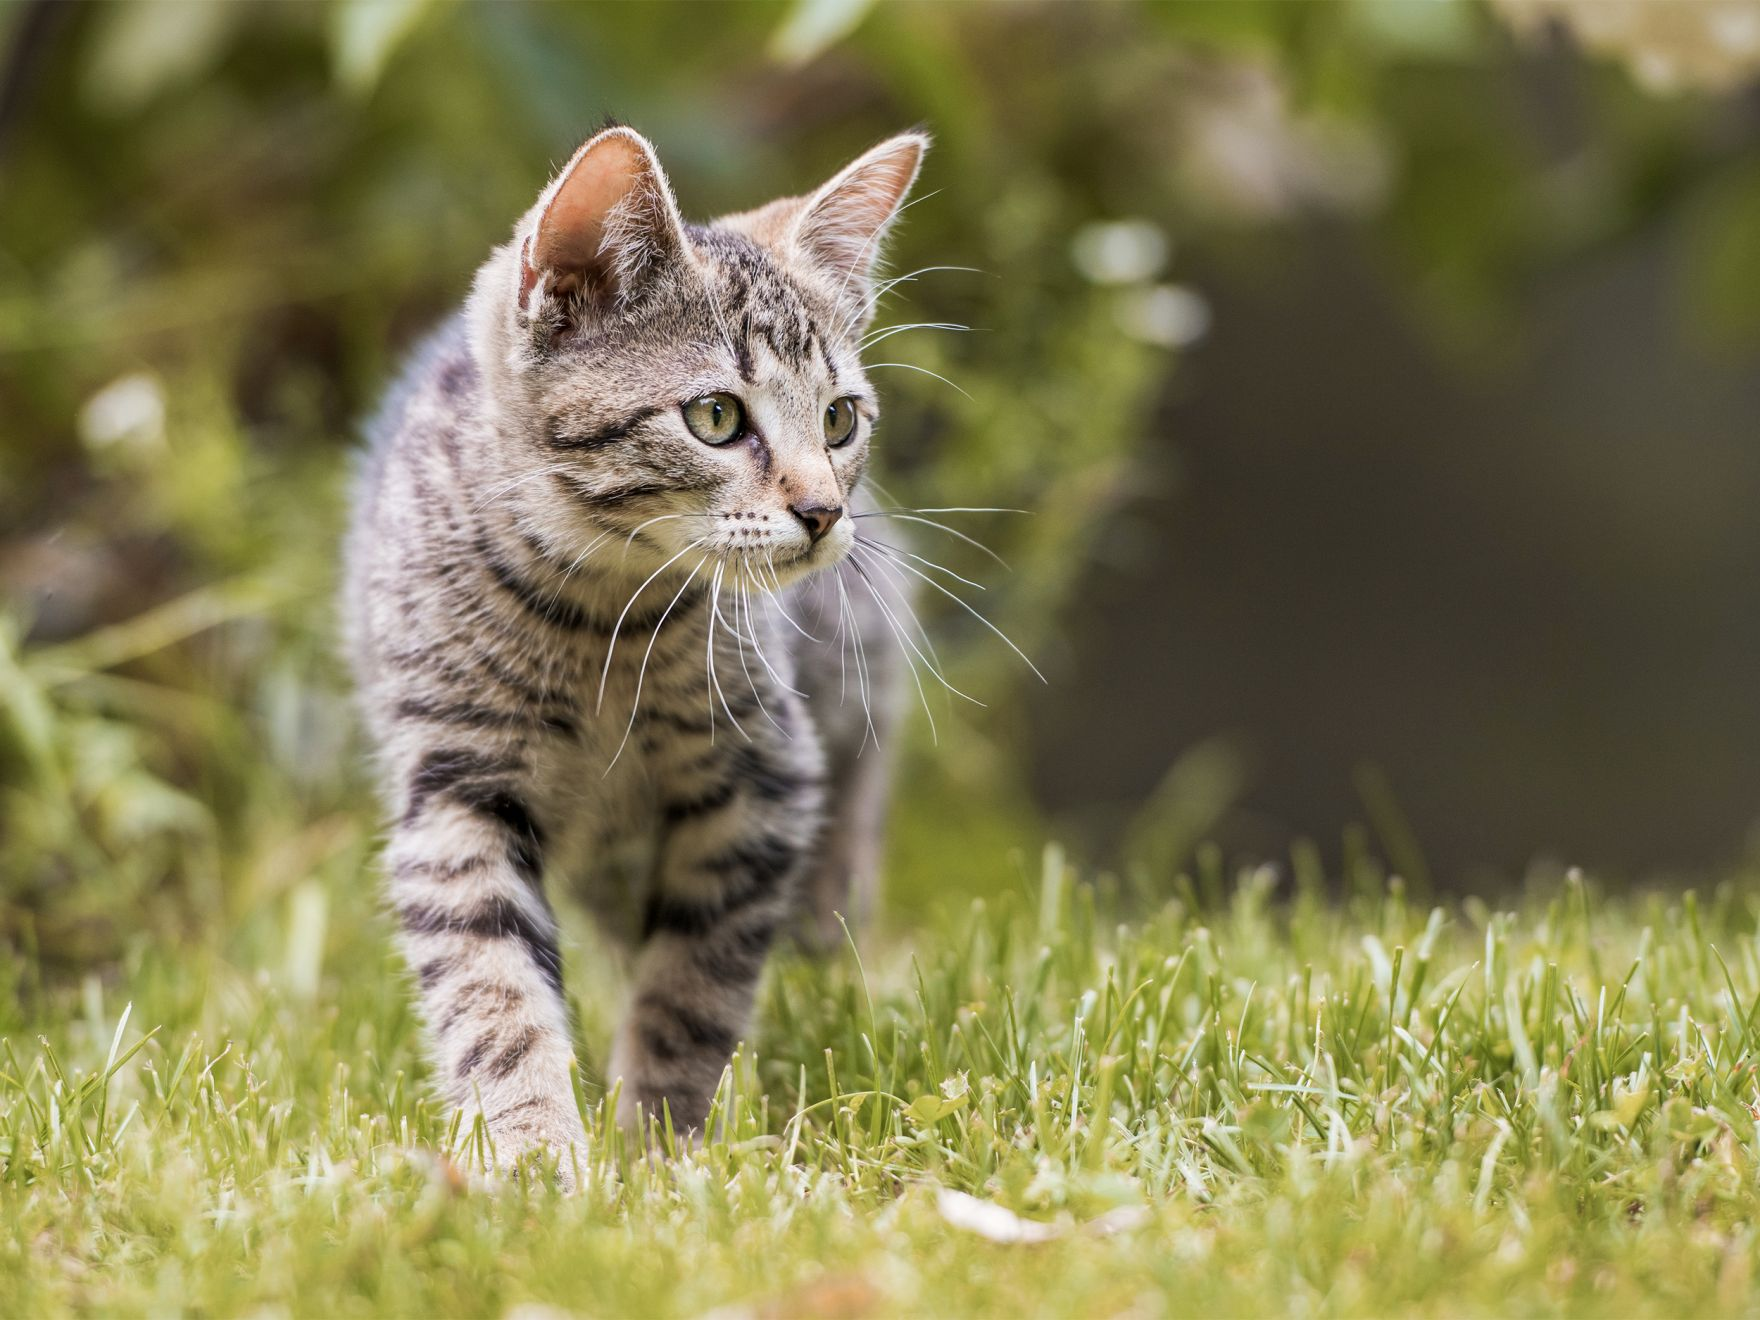 Cat outside walking through the grass